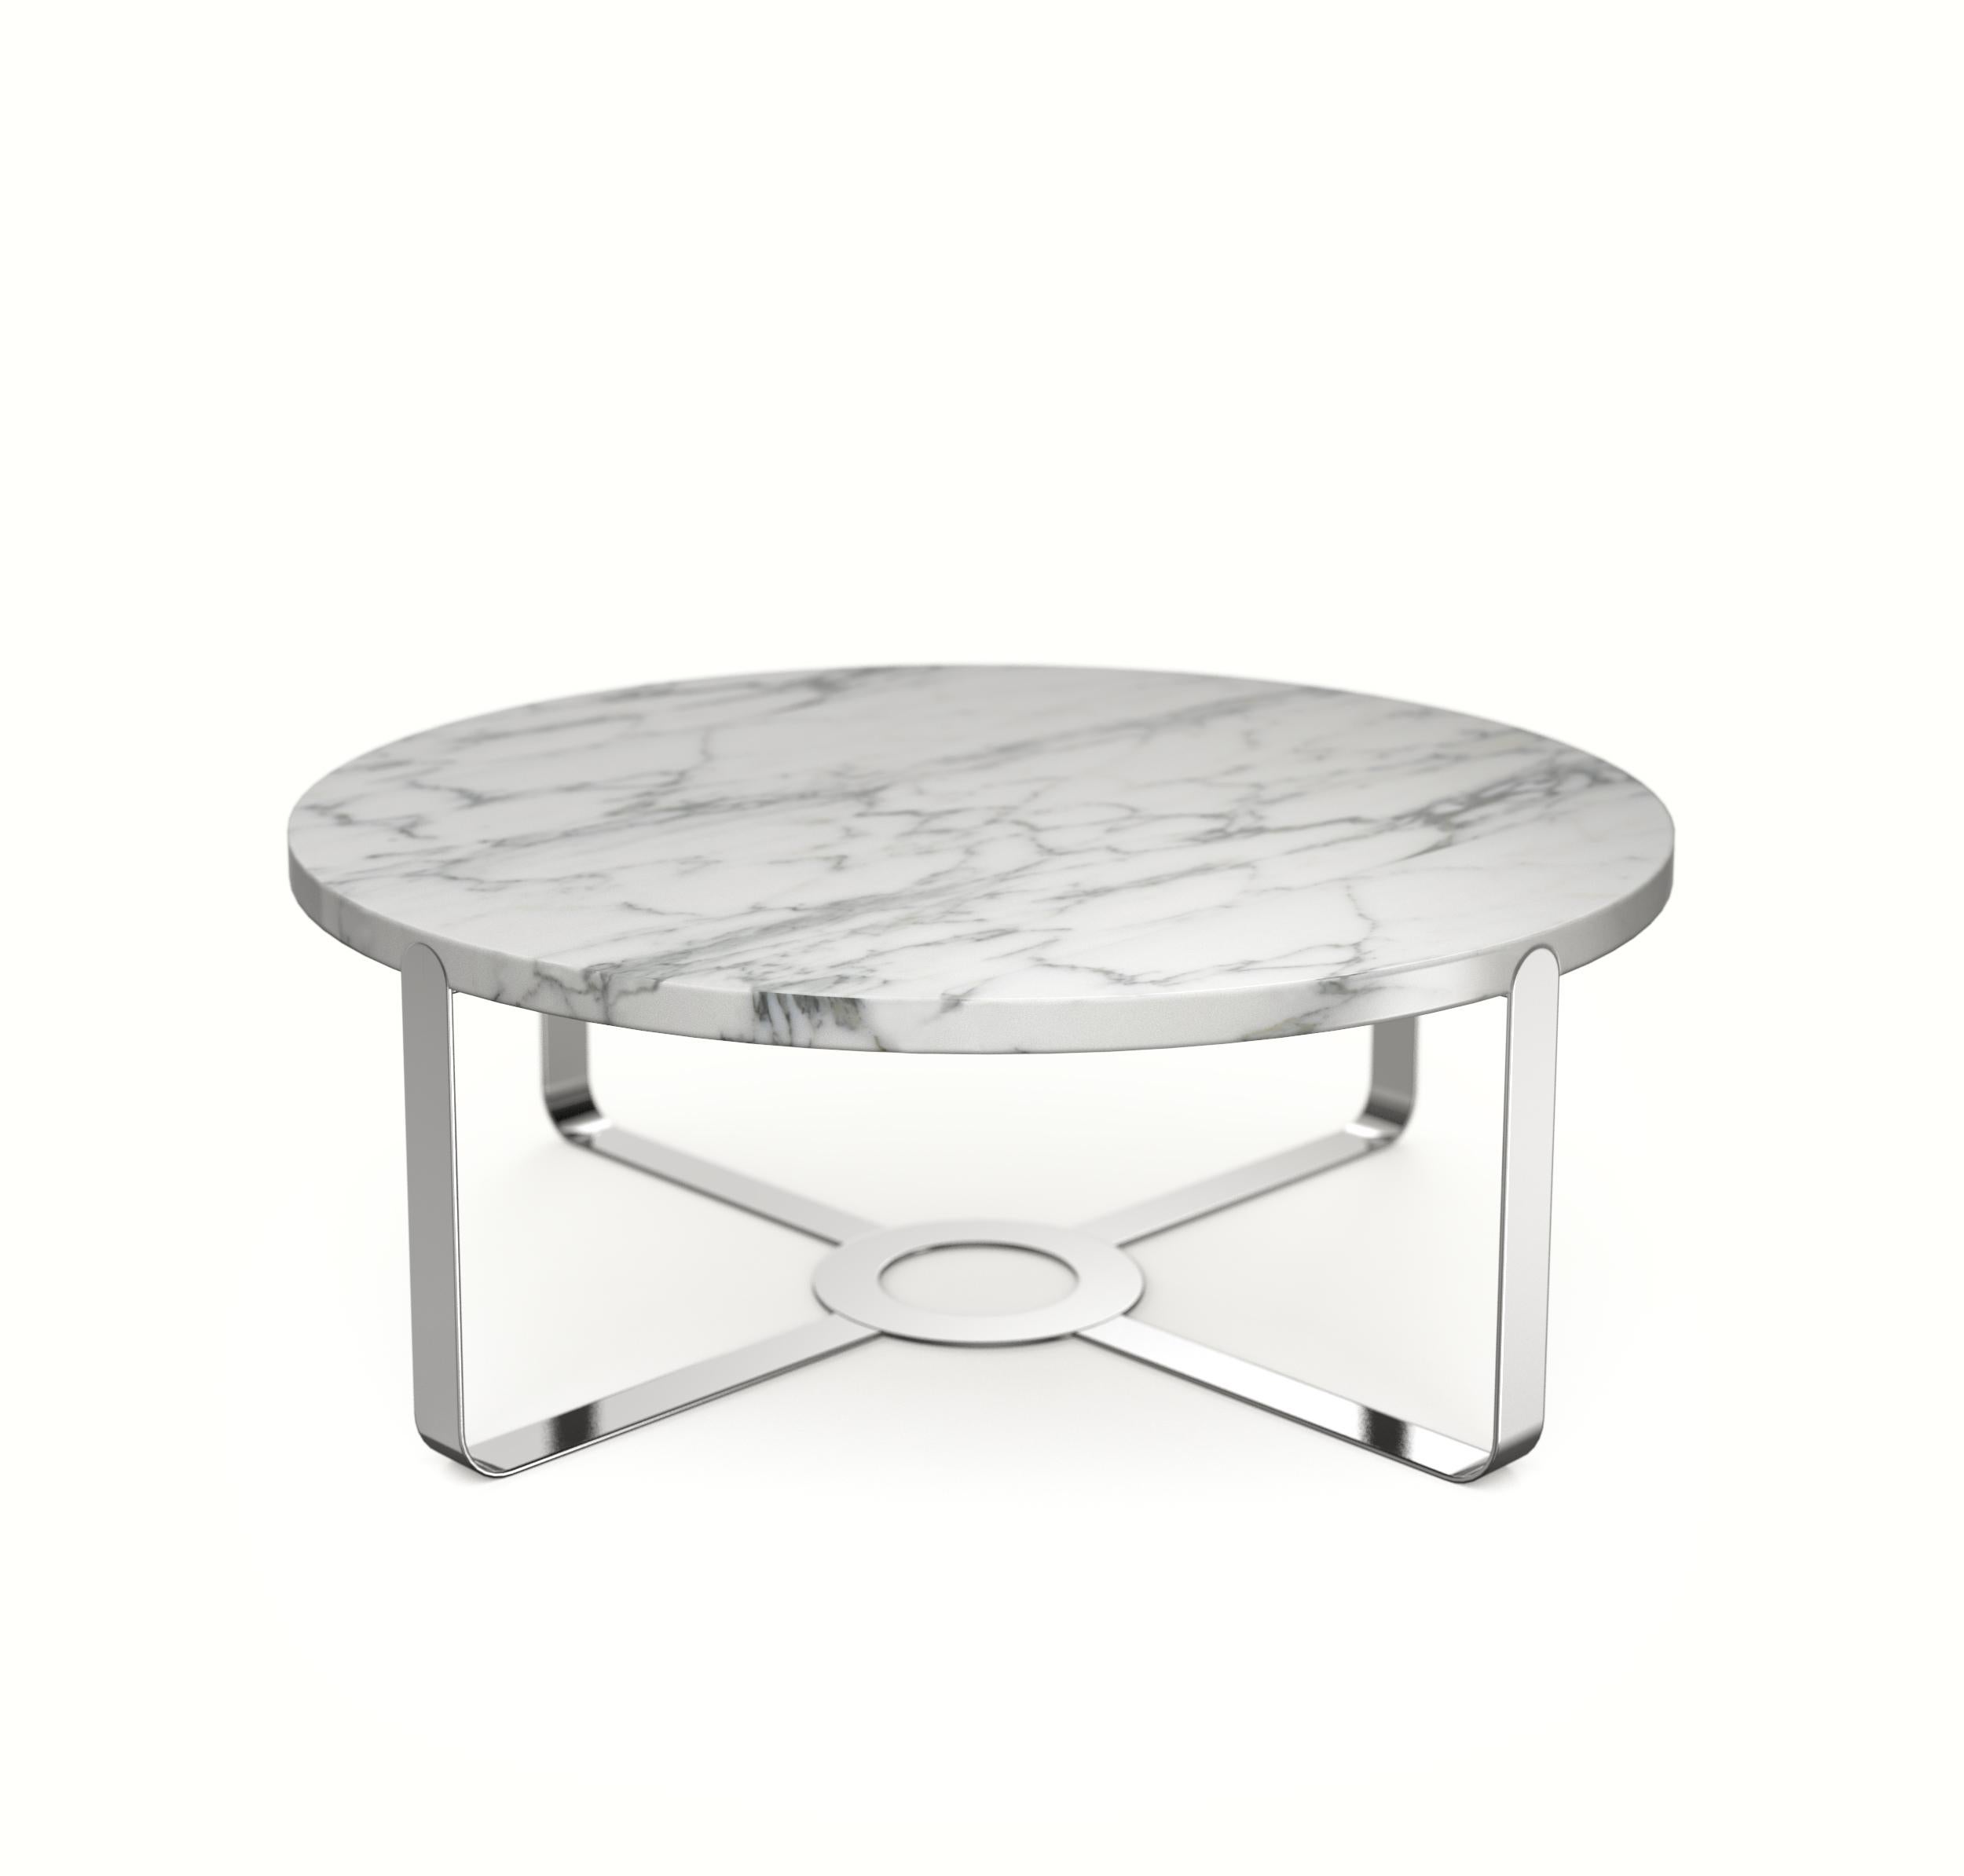 Noon marble coffee table by Marmi Serafini
Materials: Invisible grey marble
Dimensions: ø 120 H 45 cm

Noon is an elegant and classy coffee table where sinuous and subtle lines and admirable details enhance the materiality of marble.

Marmi